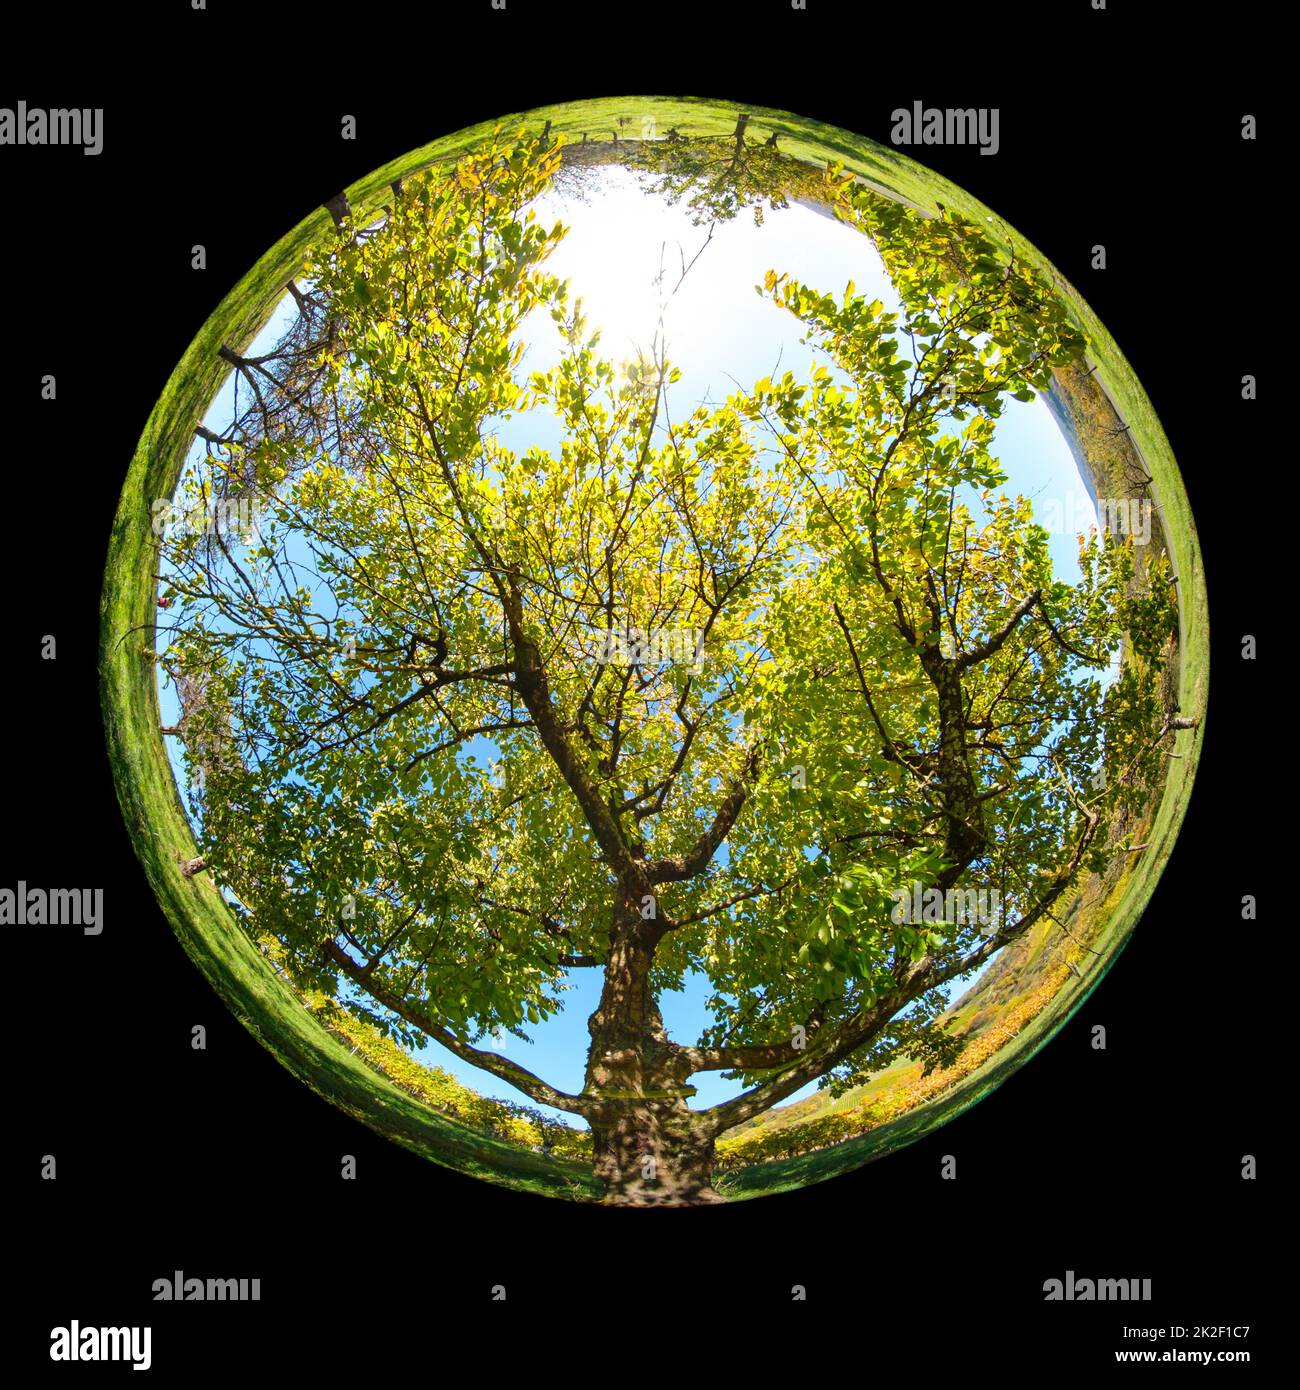 Old cherry tree plant with green foliage with fish-eye lens Stock Photo